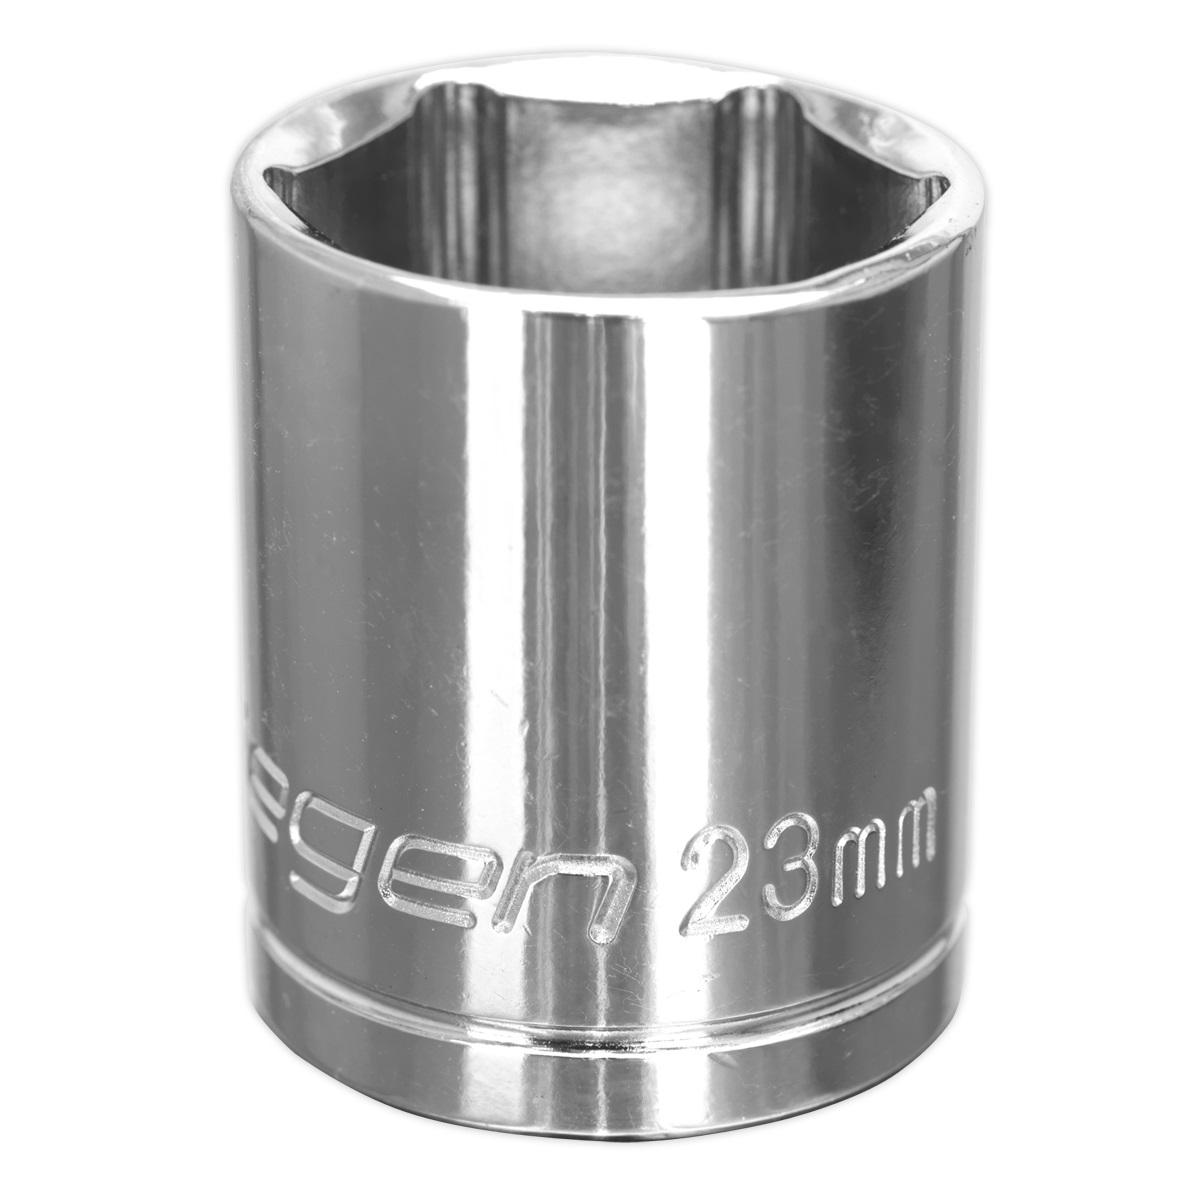 Siegen WallDrive® Socket 23mm 1/2"Sq Drive S0660 | High grade carbon steel socket. | 
Hardened and tempered for added strength.